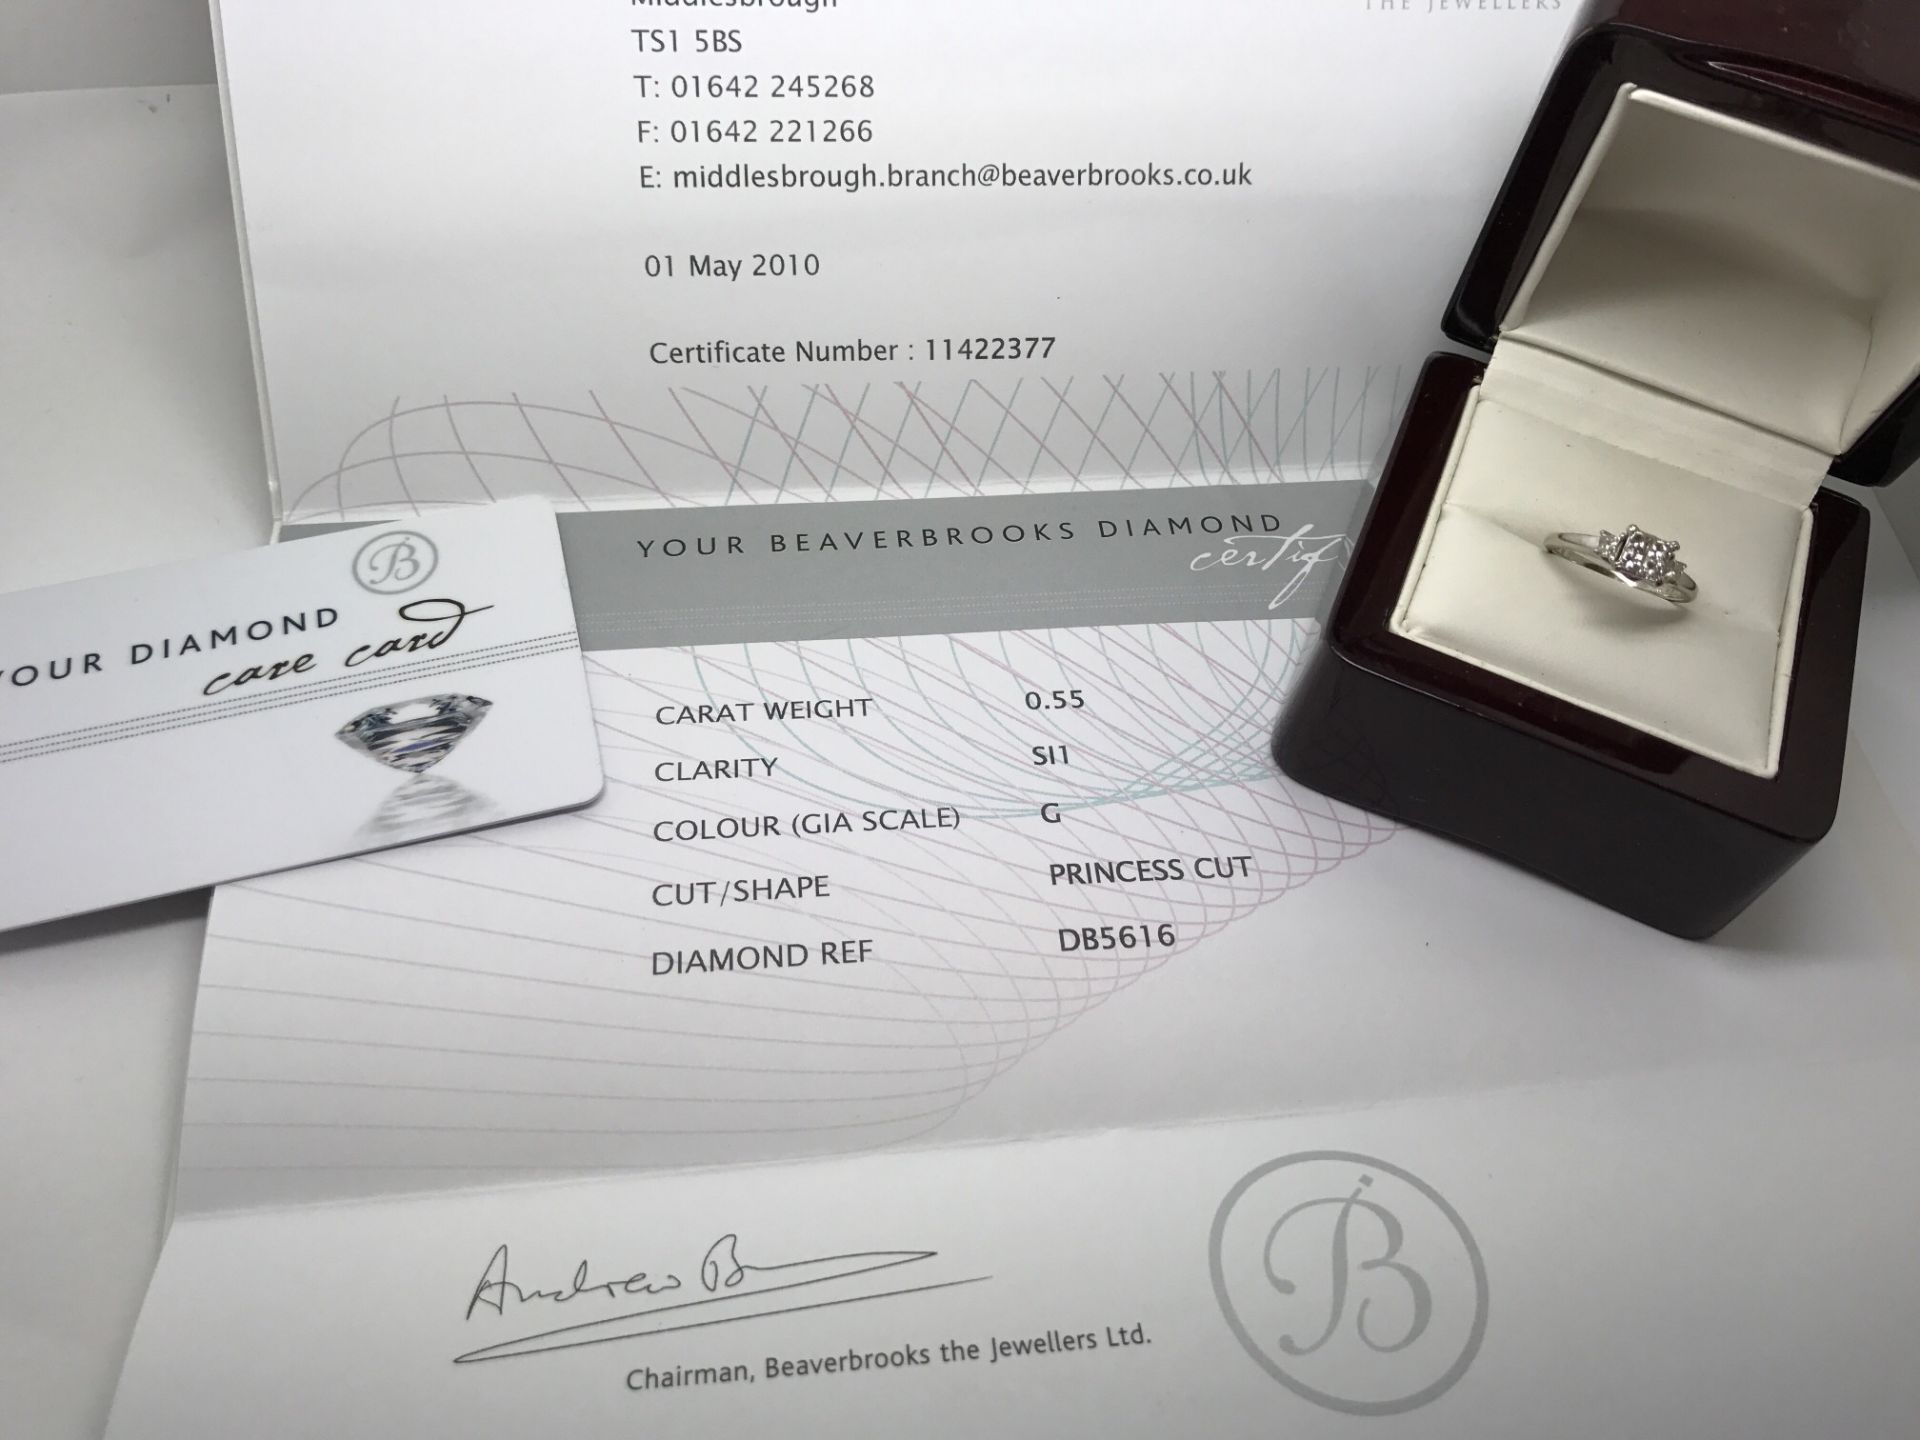 18ct GOLD DIAMOND RING COST £1850 WITH CERTIFICATE